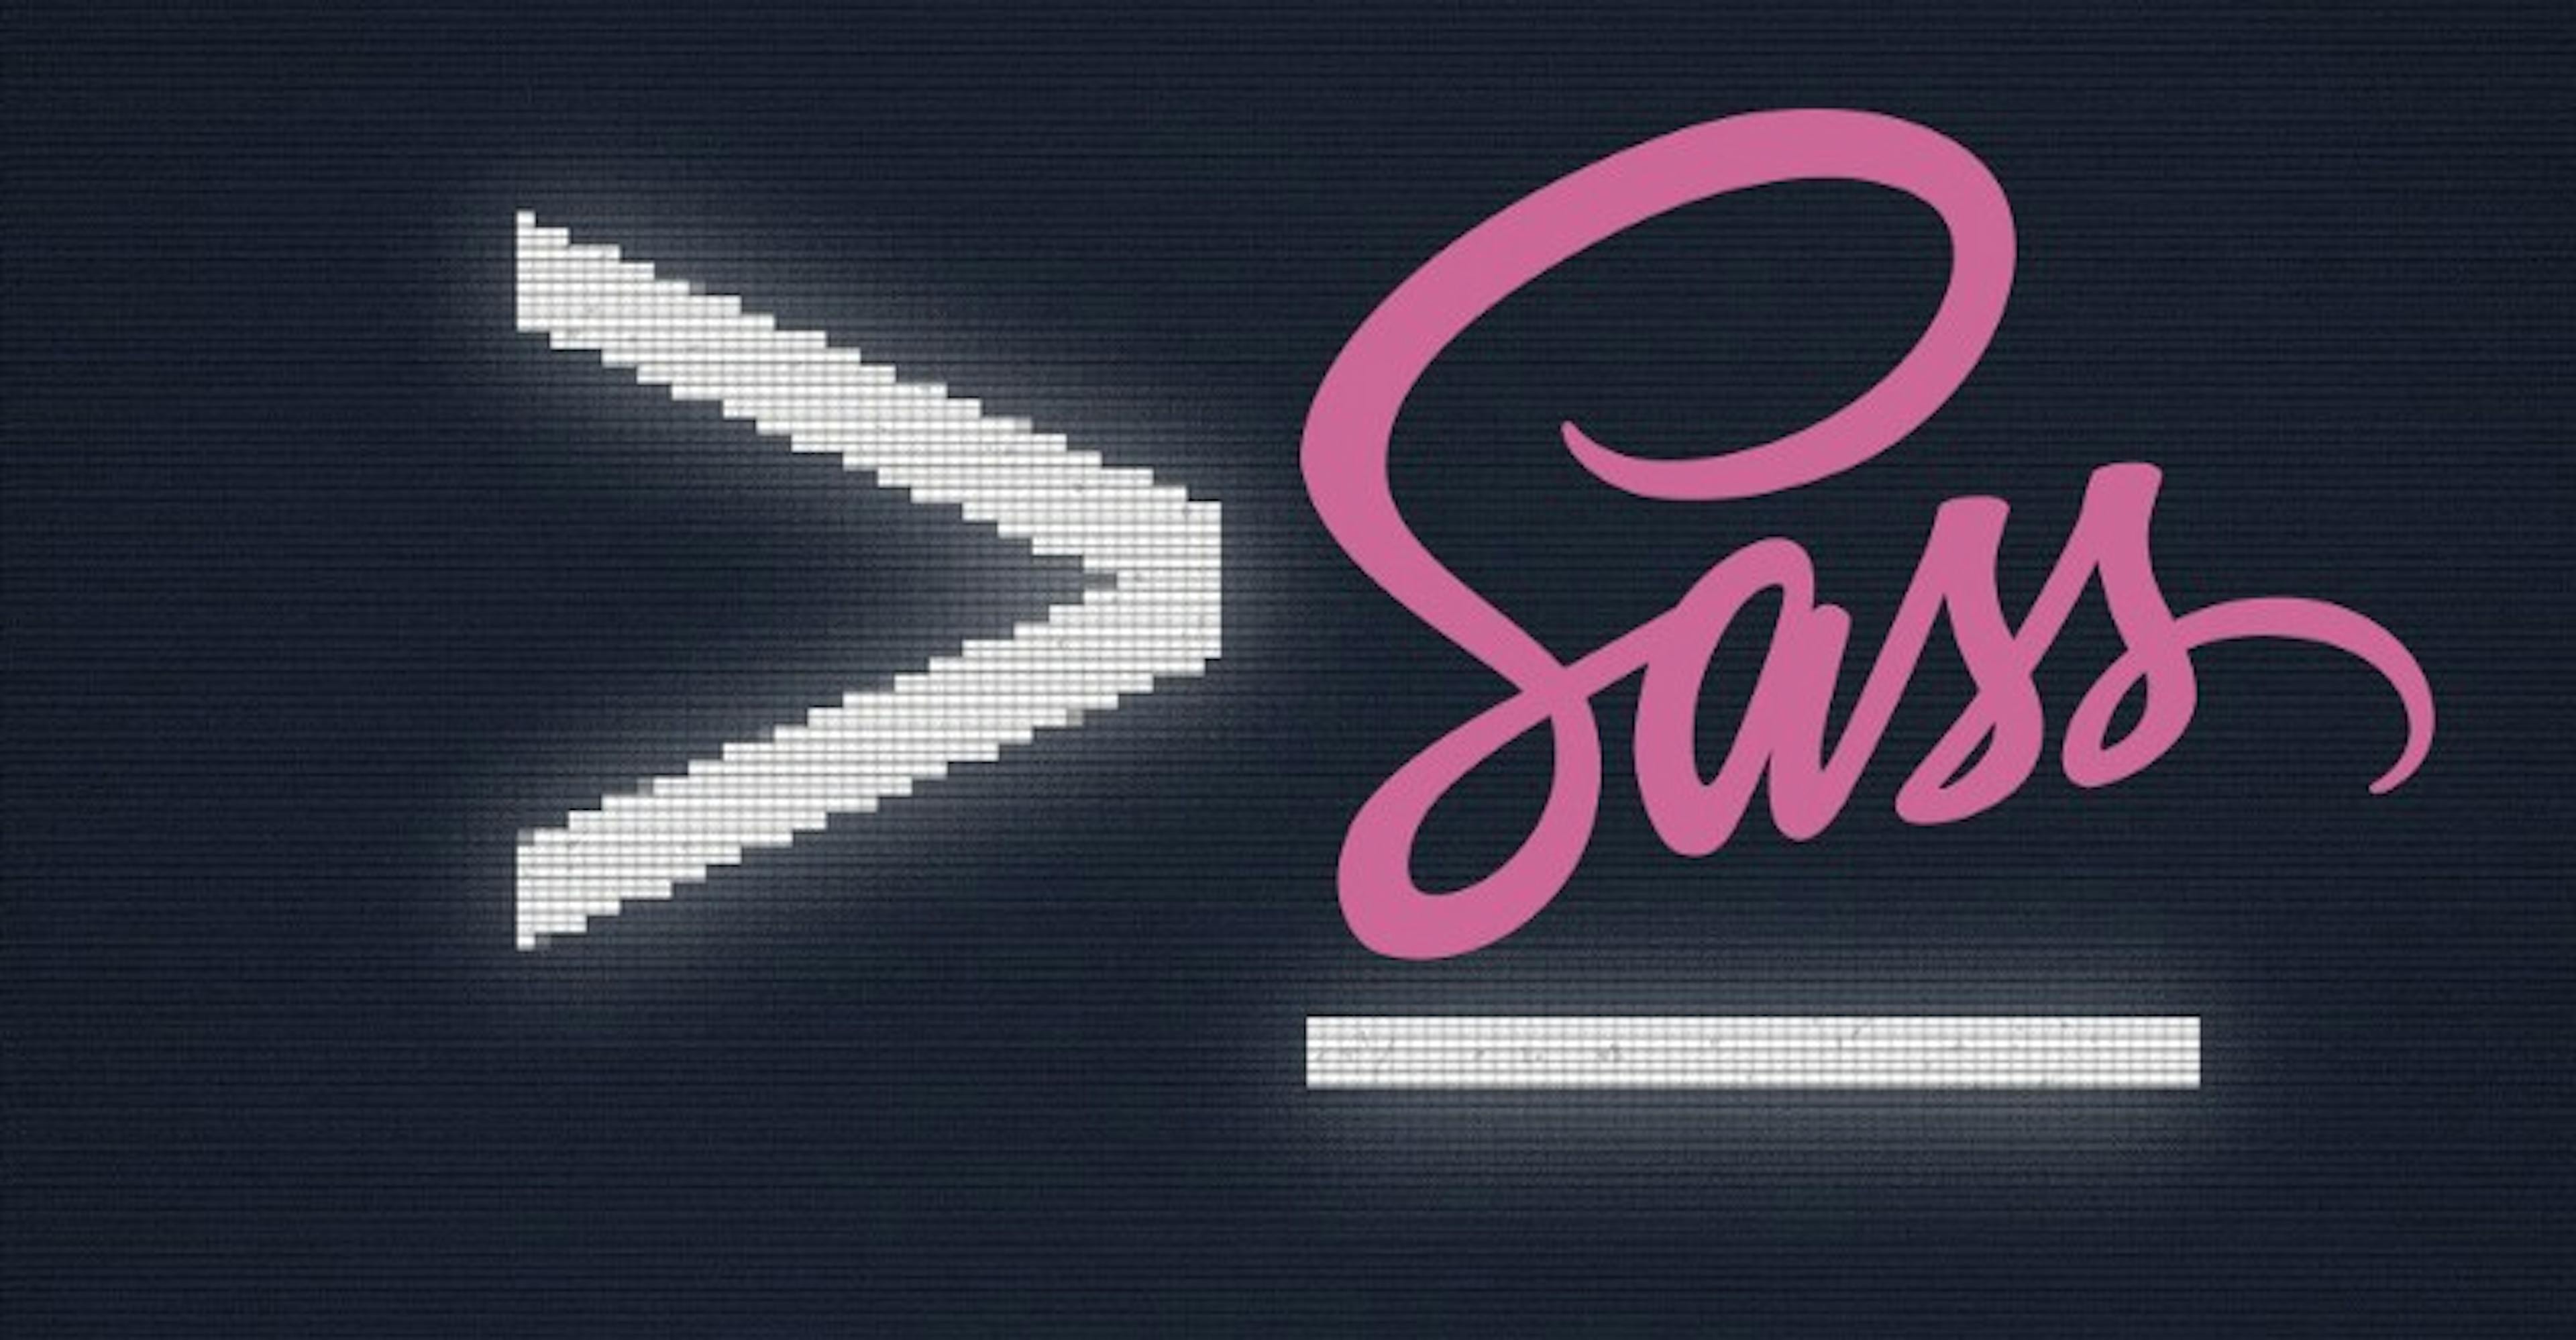 command prompt with sass logo